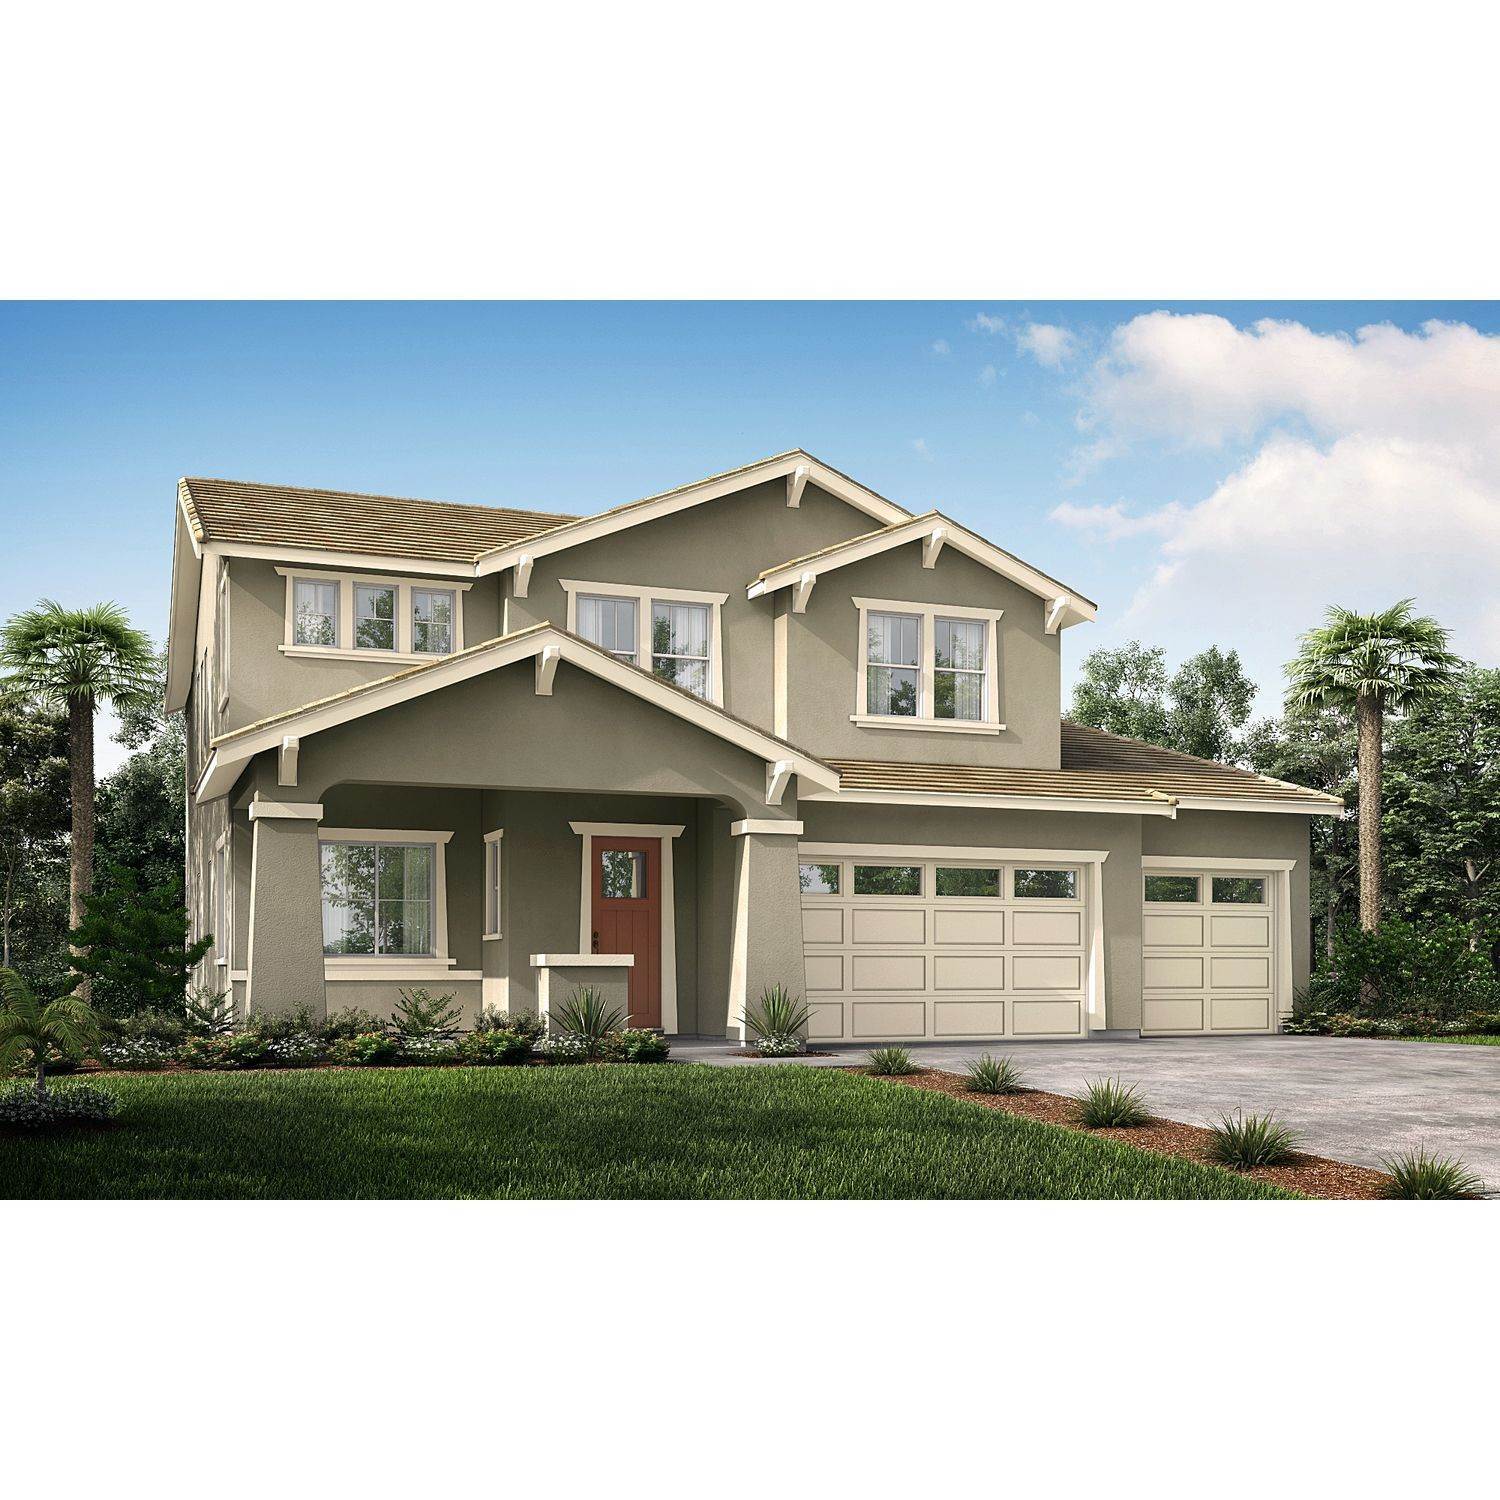 Single Family for Active at Woodlands At Brooklyn Trail - Primrose 2278 N Mcauthur Ave. FRESNO, CALIFORNIA 93727 UNITED STATES